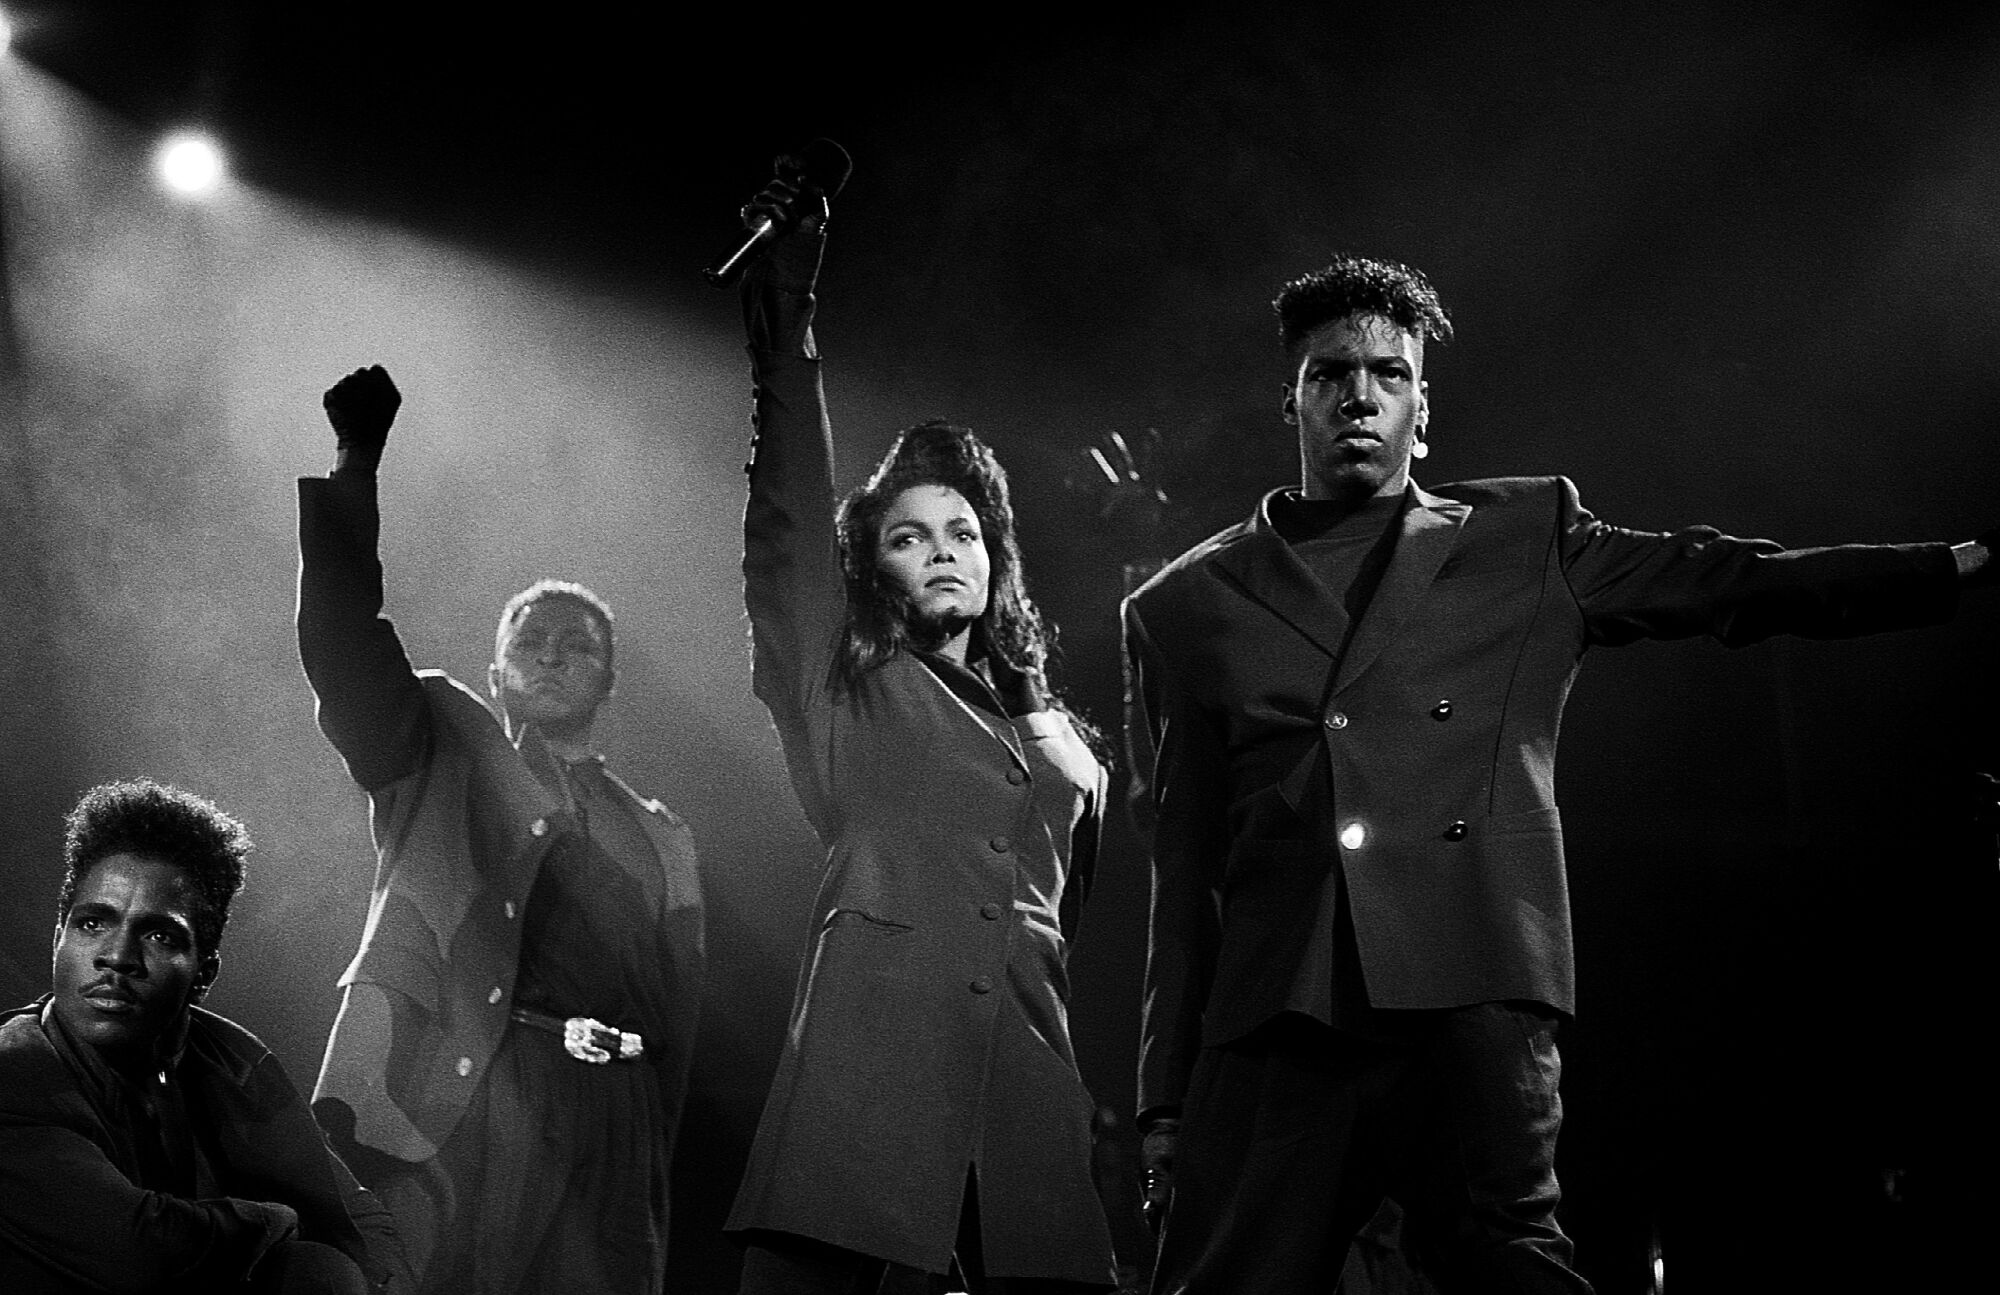 Black-and-white photo of Janet Jackson raising her fist, flanked by three performers, one of whom is raising his fist 